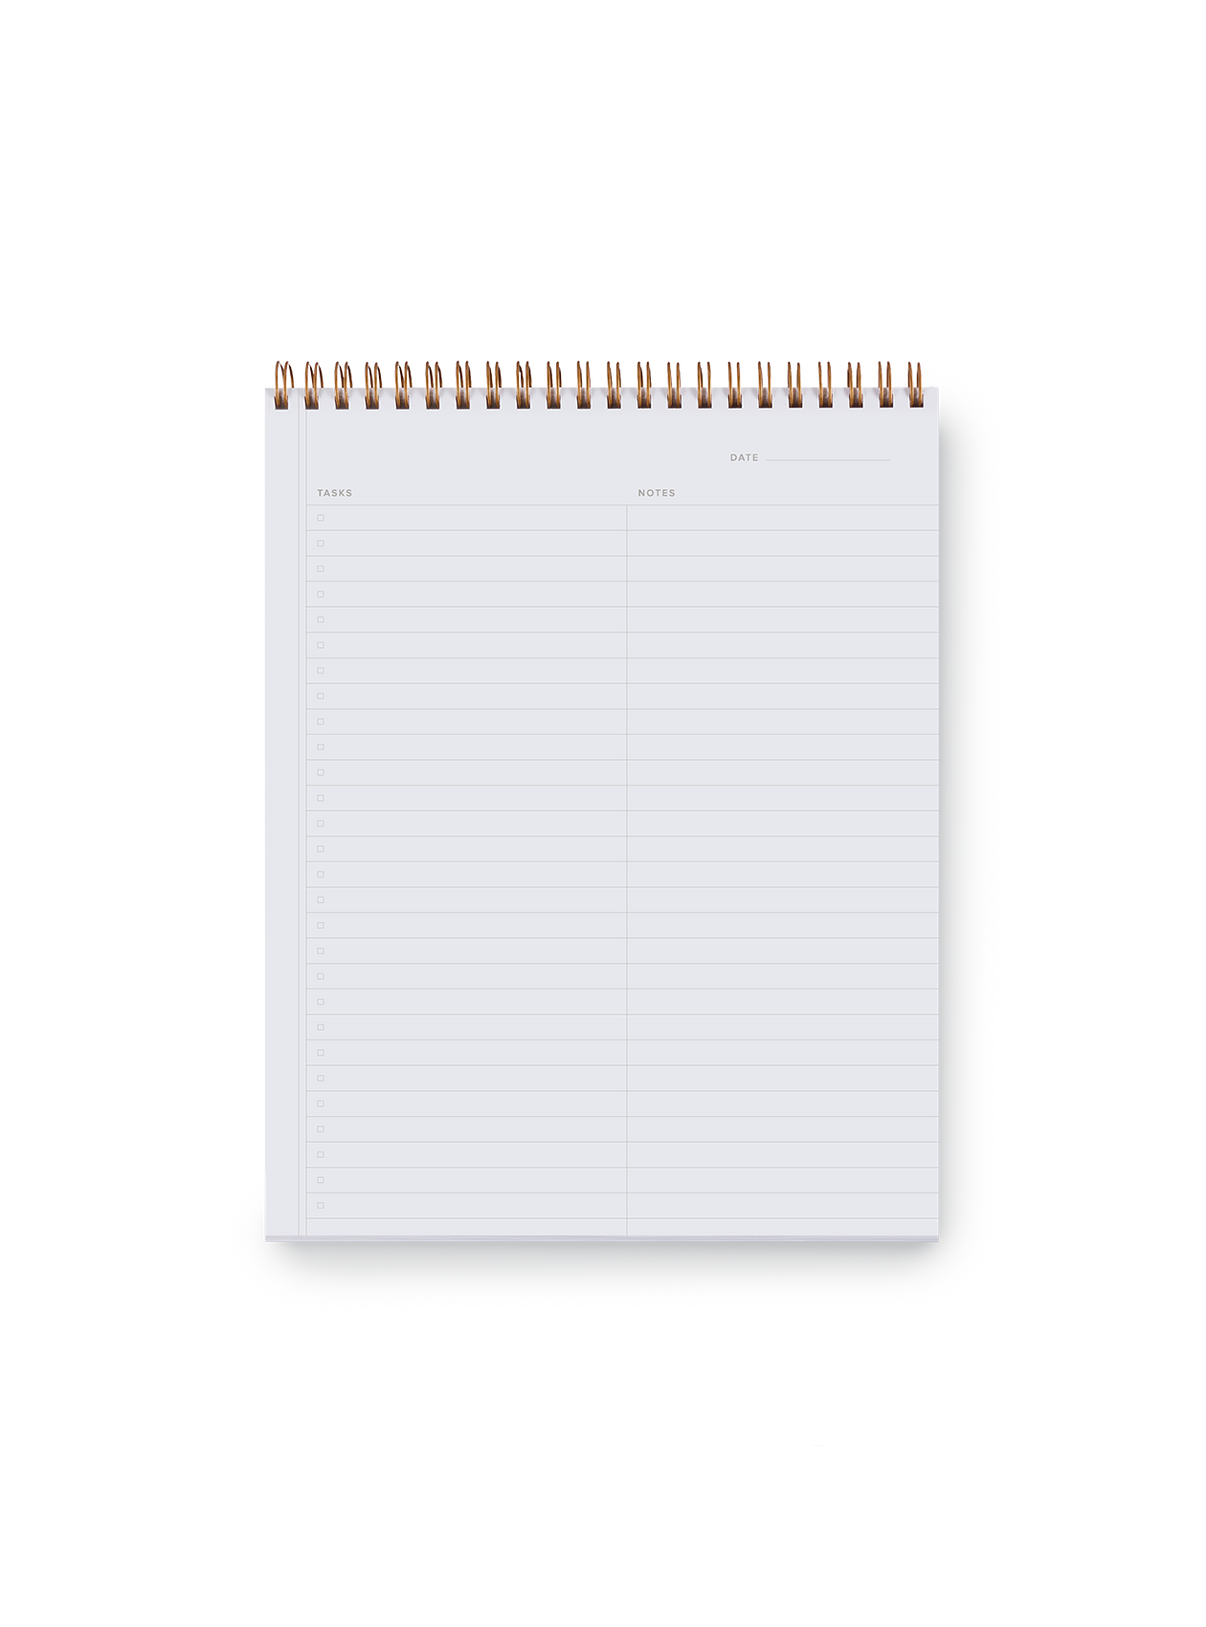 Note Taker & Keeper interior with task and notes section and premium 70# stock